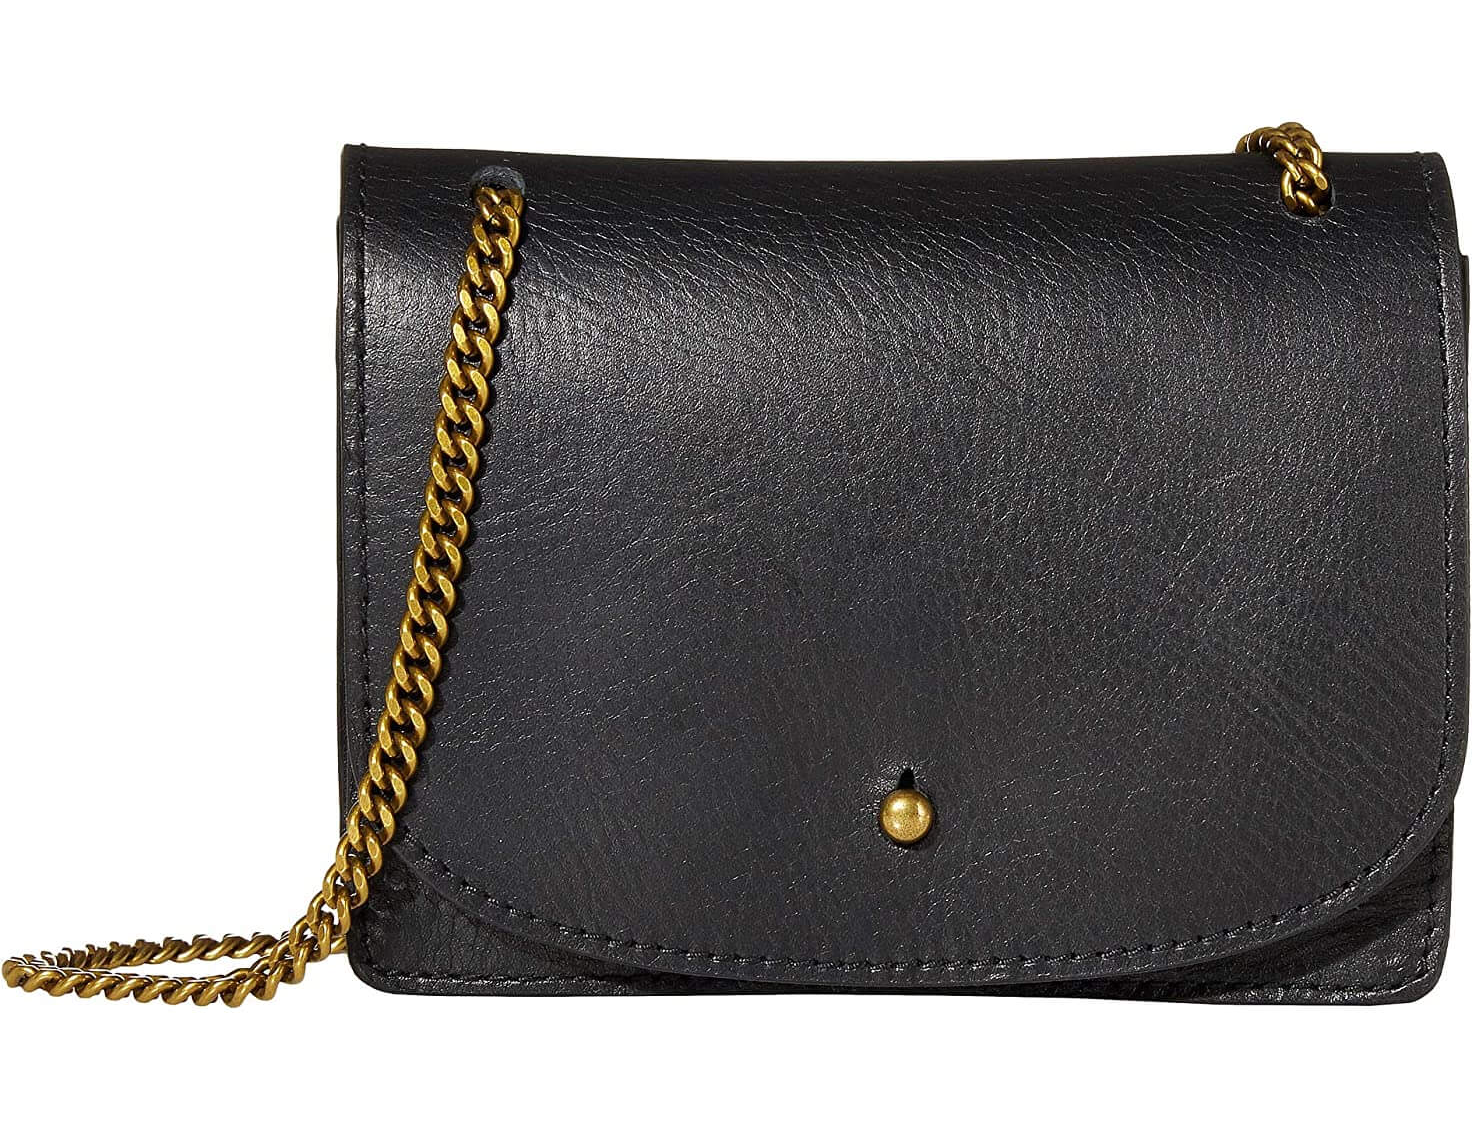 madewell the chain crossbody bag black leather bag gold chain and button